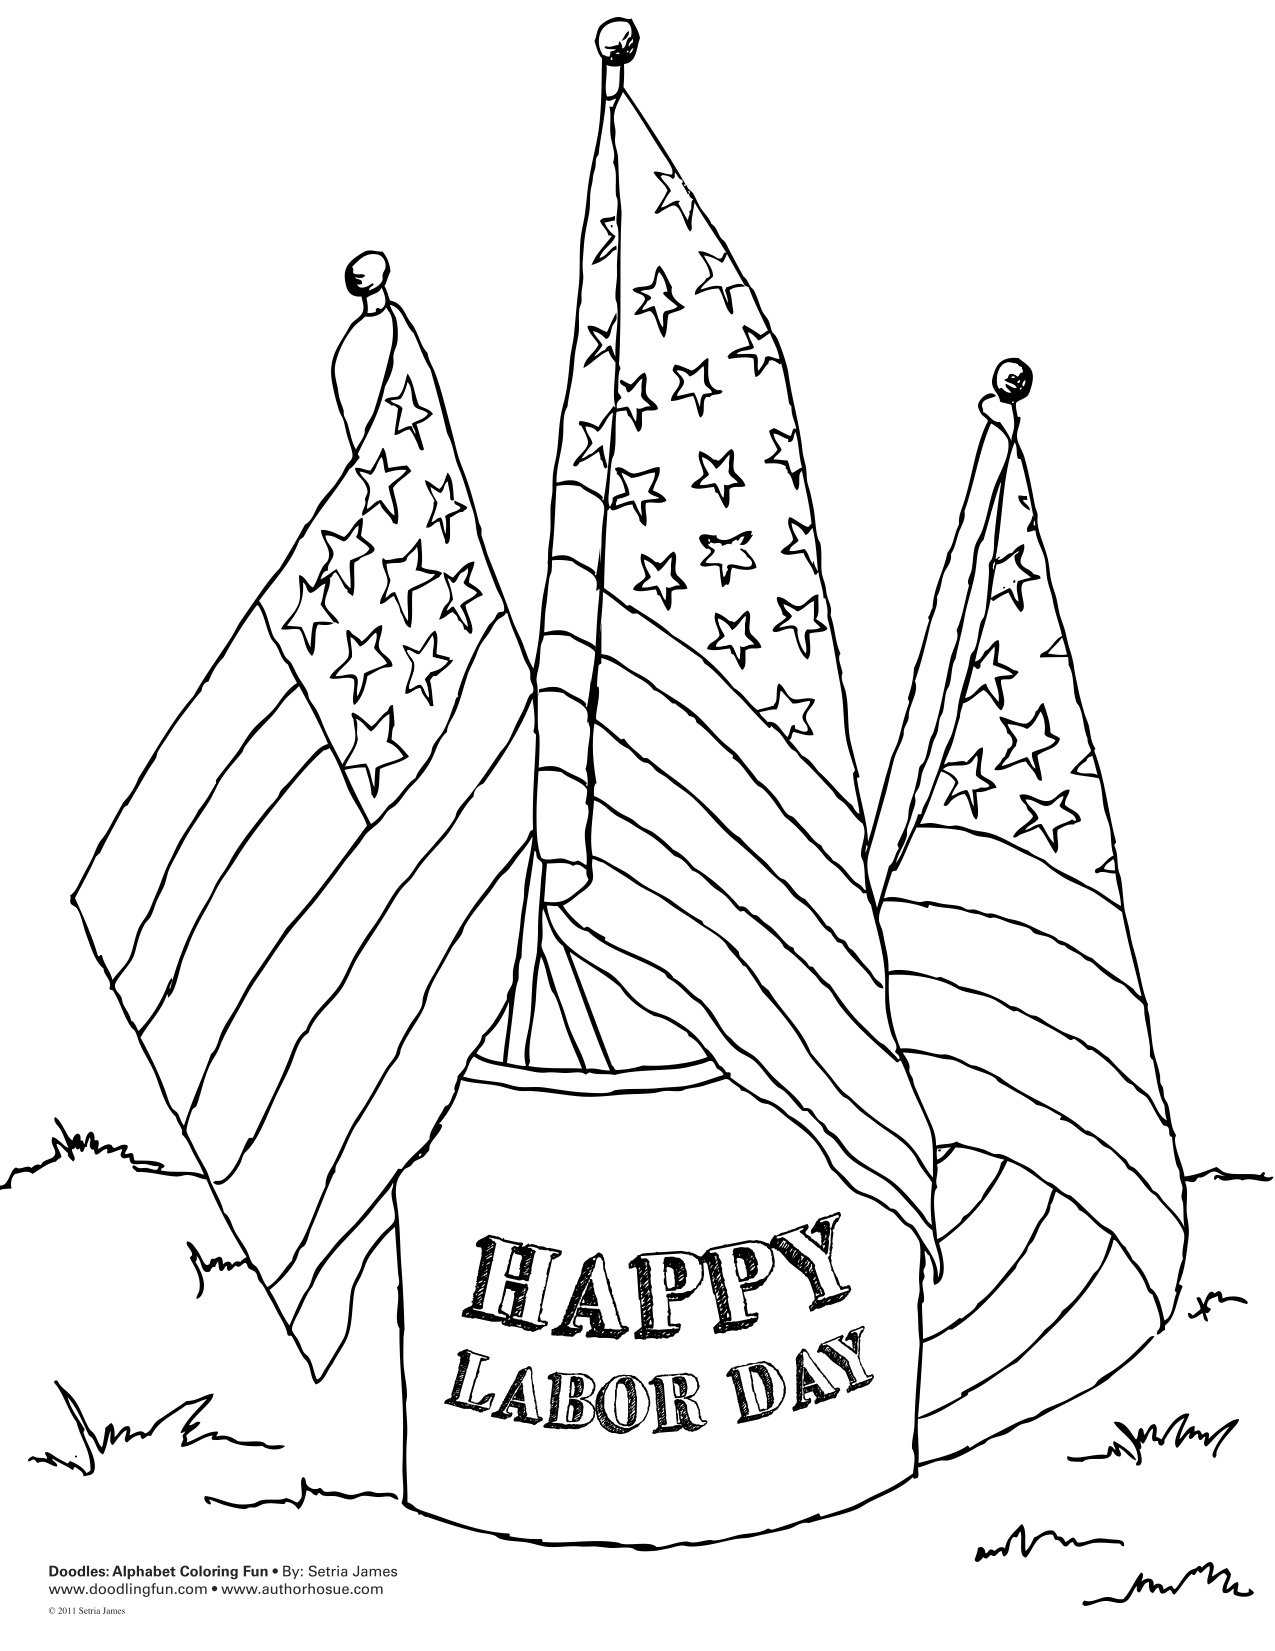 happy-labor-day-coloring-sheet-doodles-ave